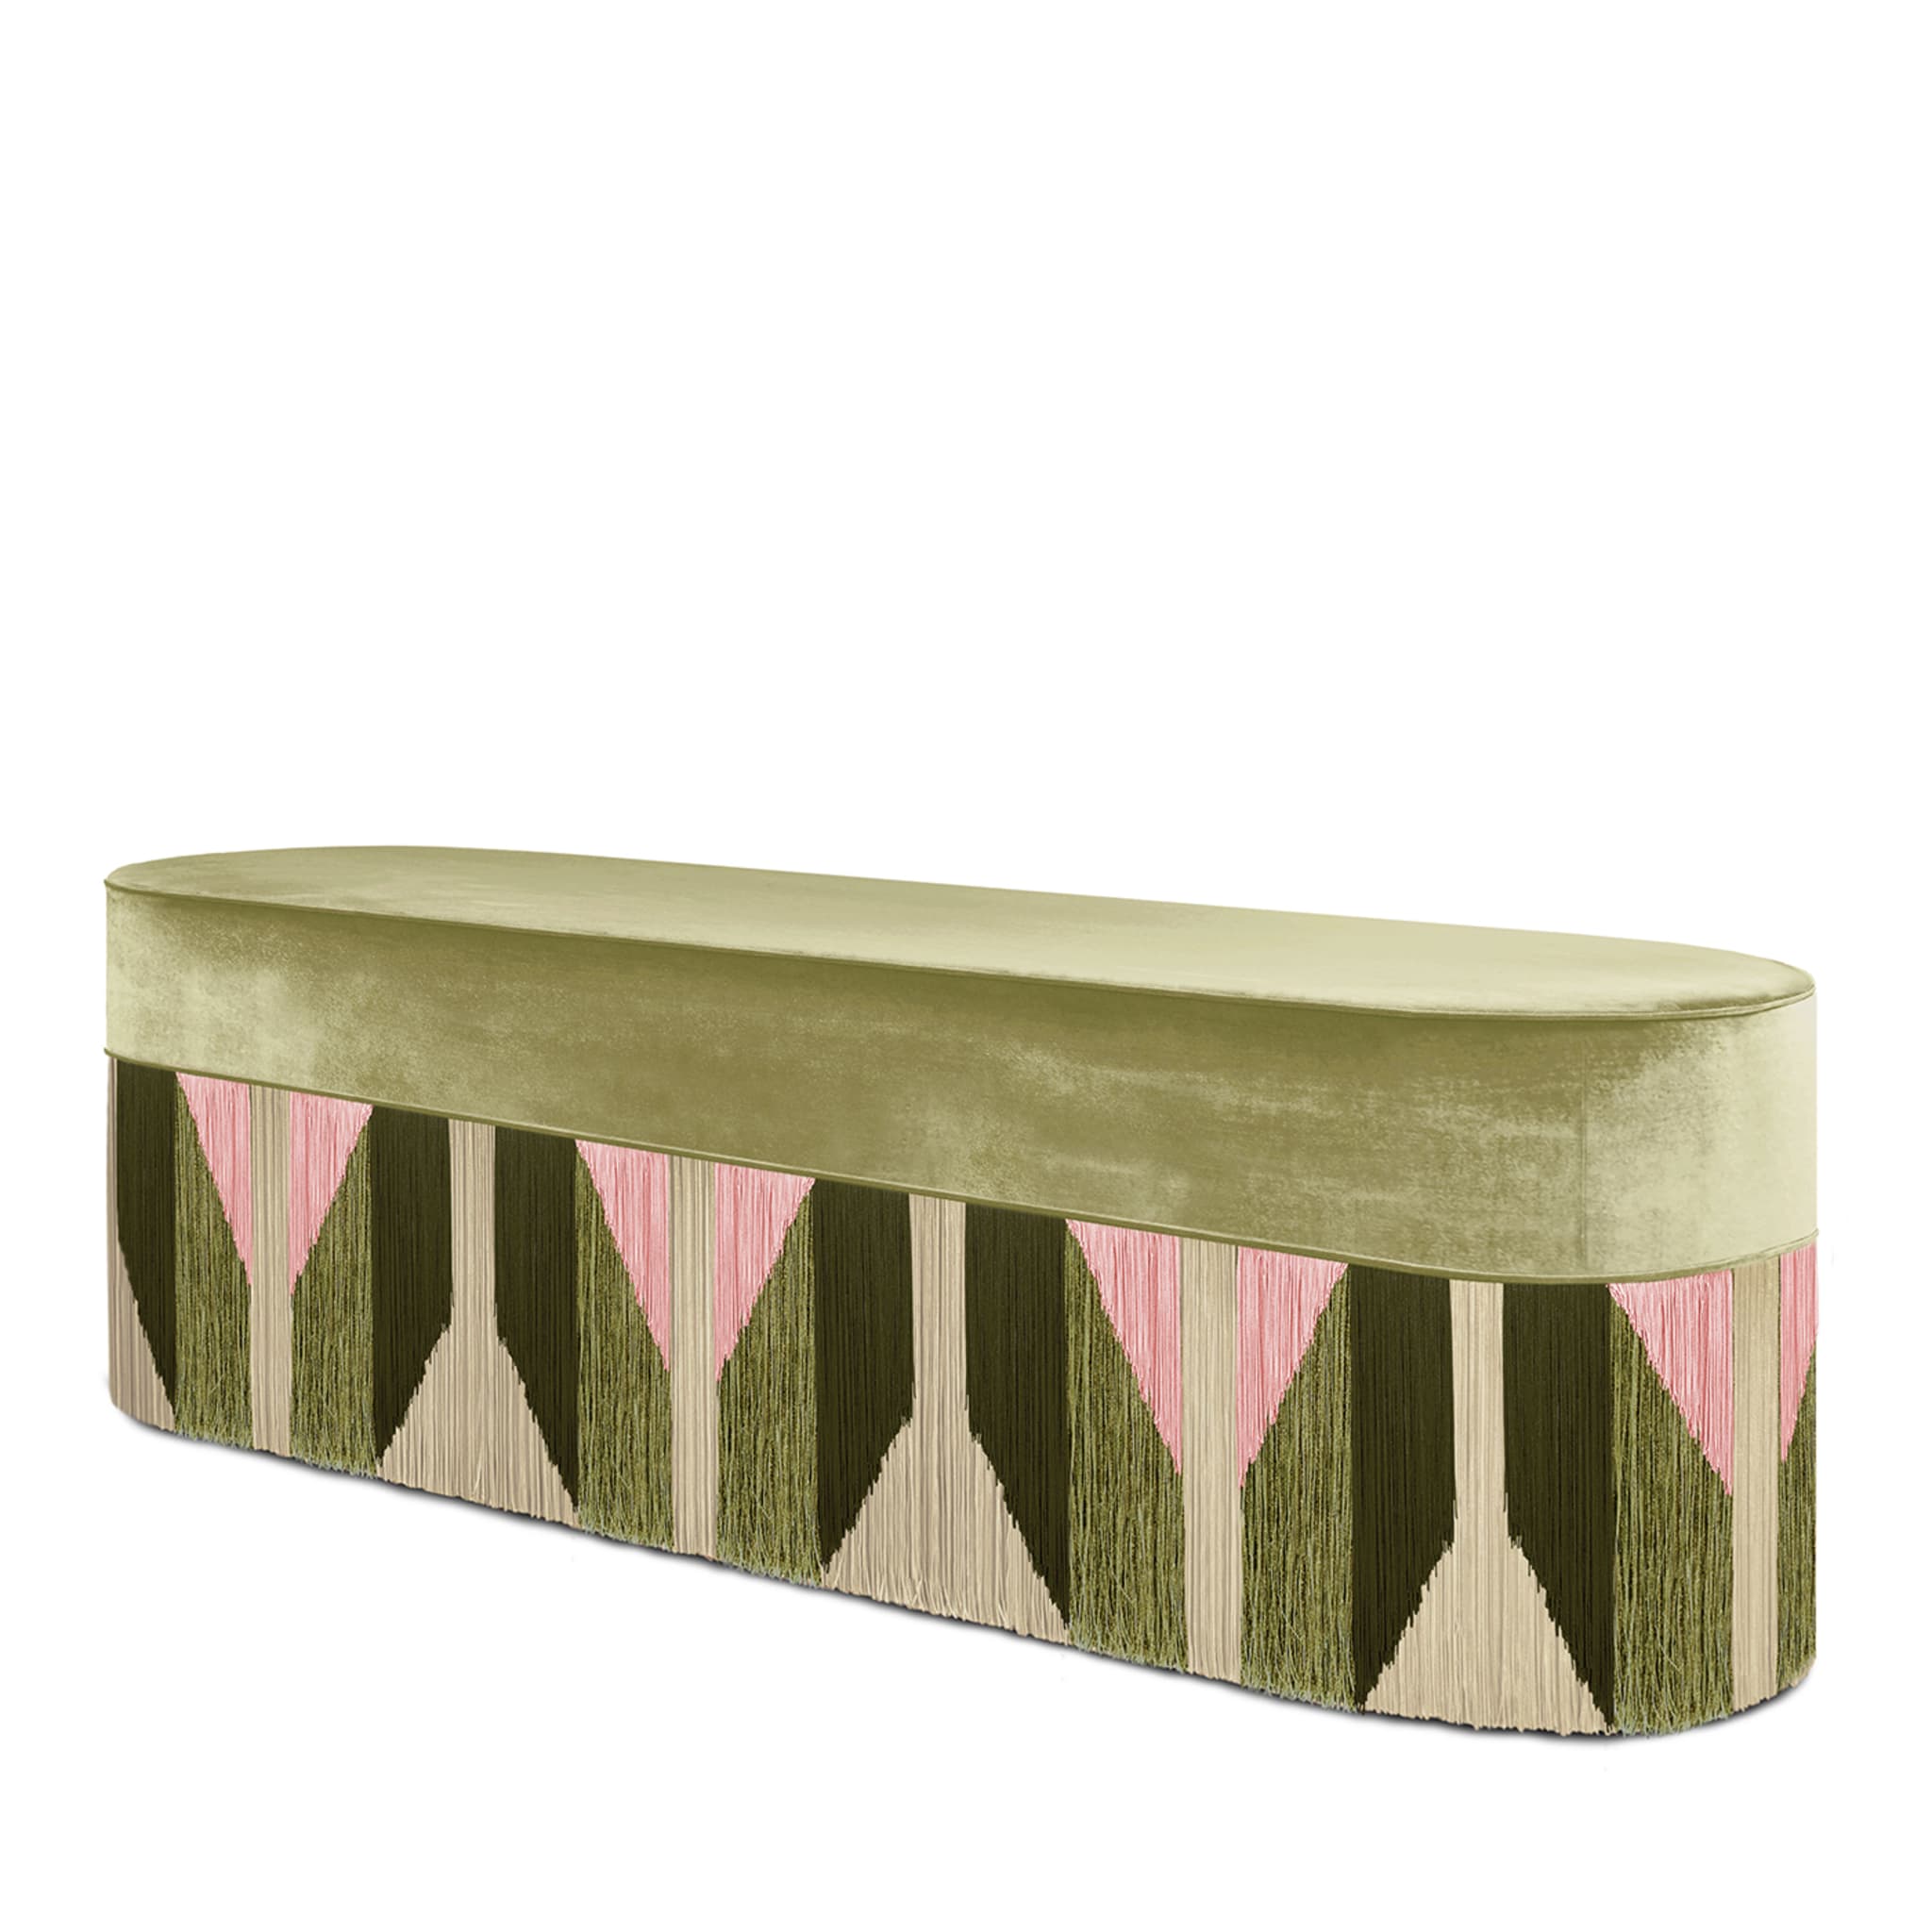 Couture Tribe Polychrome Bench #5 - Alternative view 2